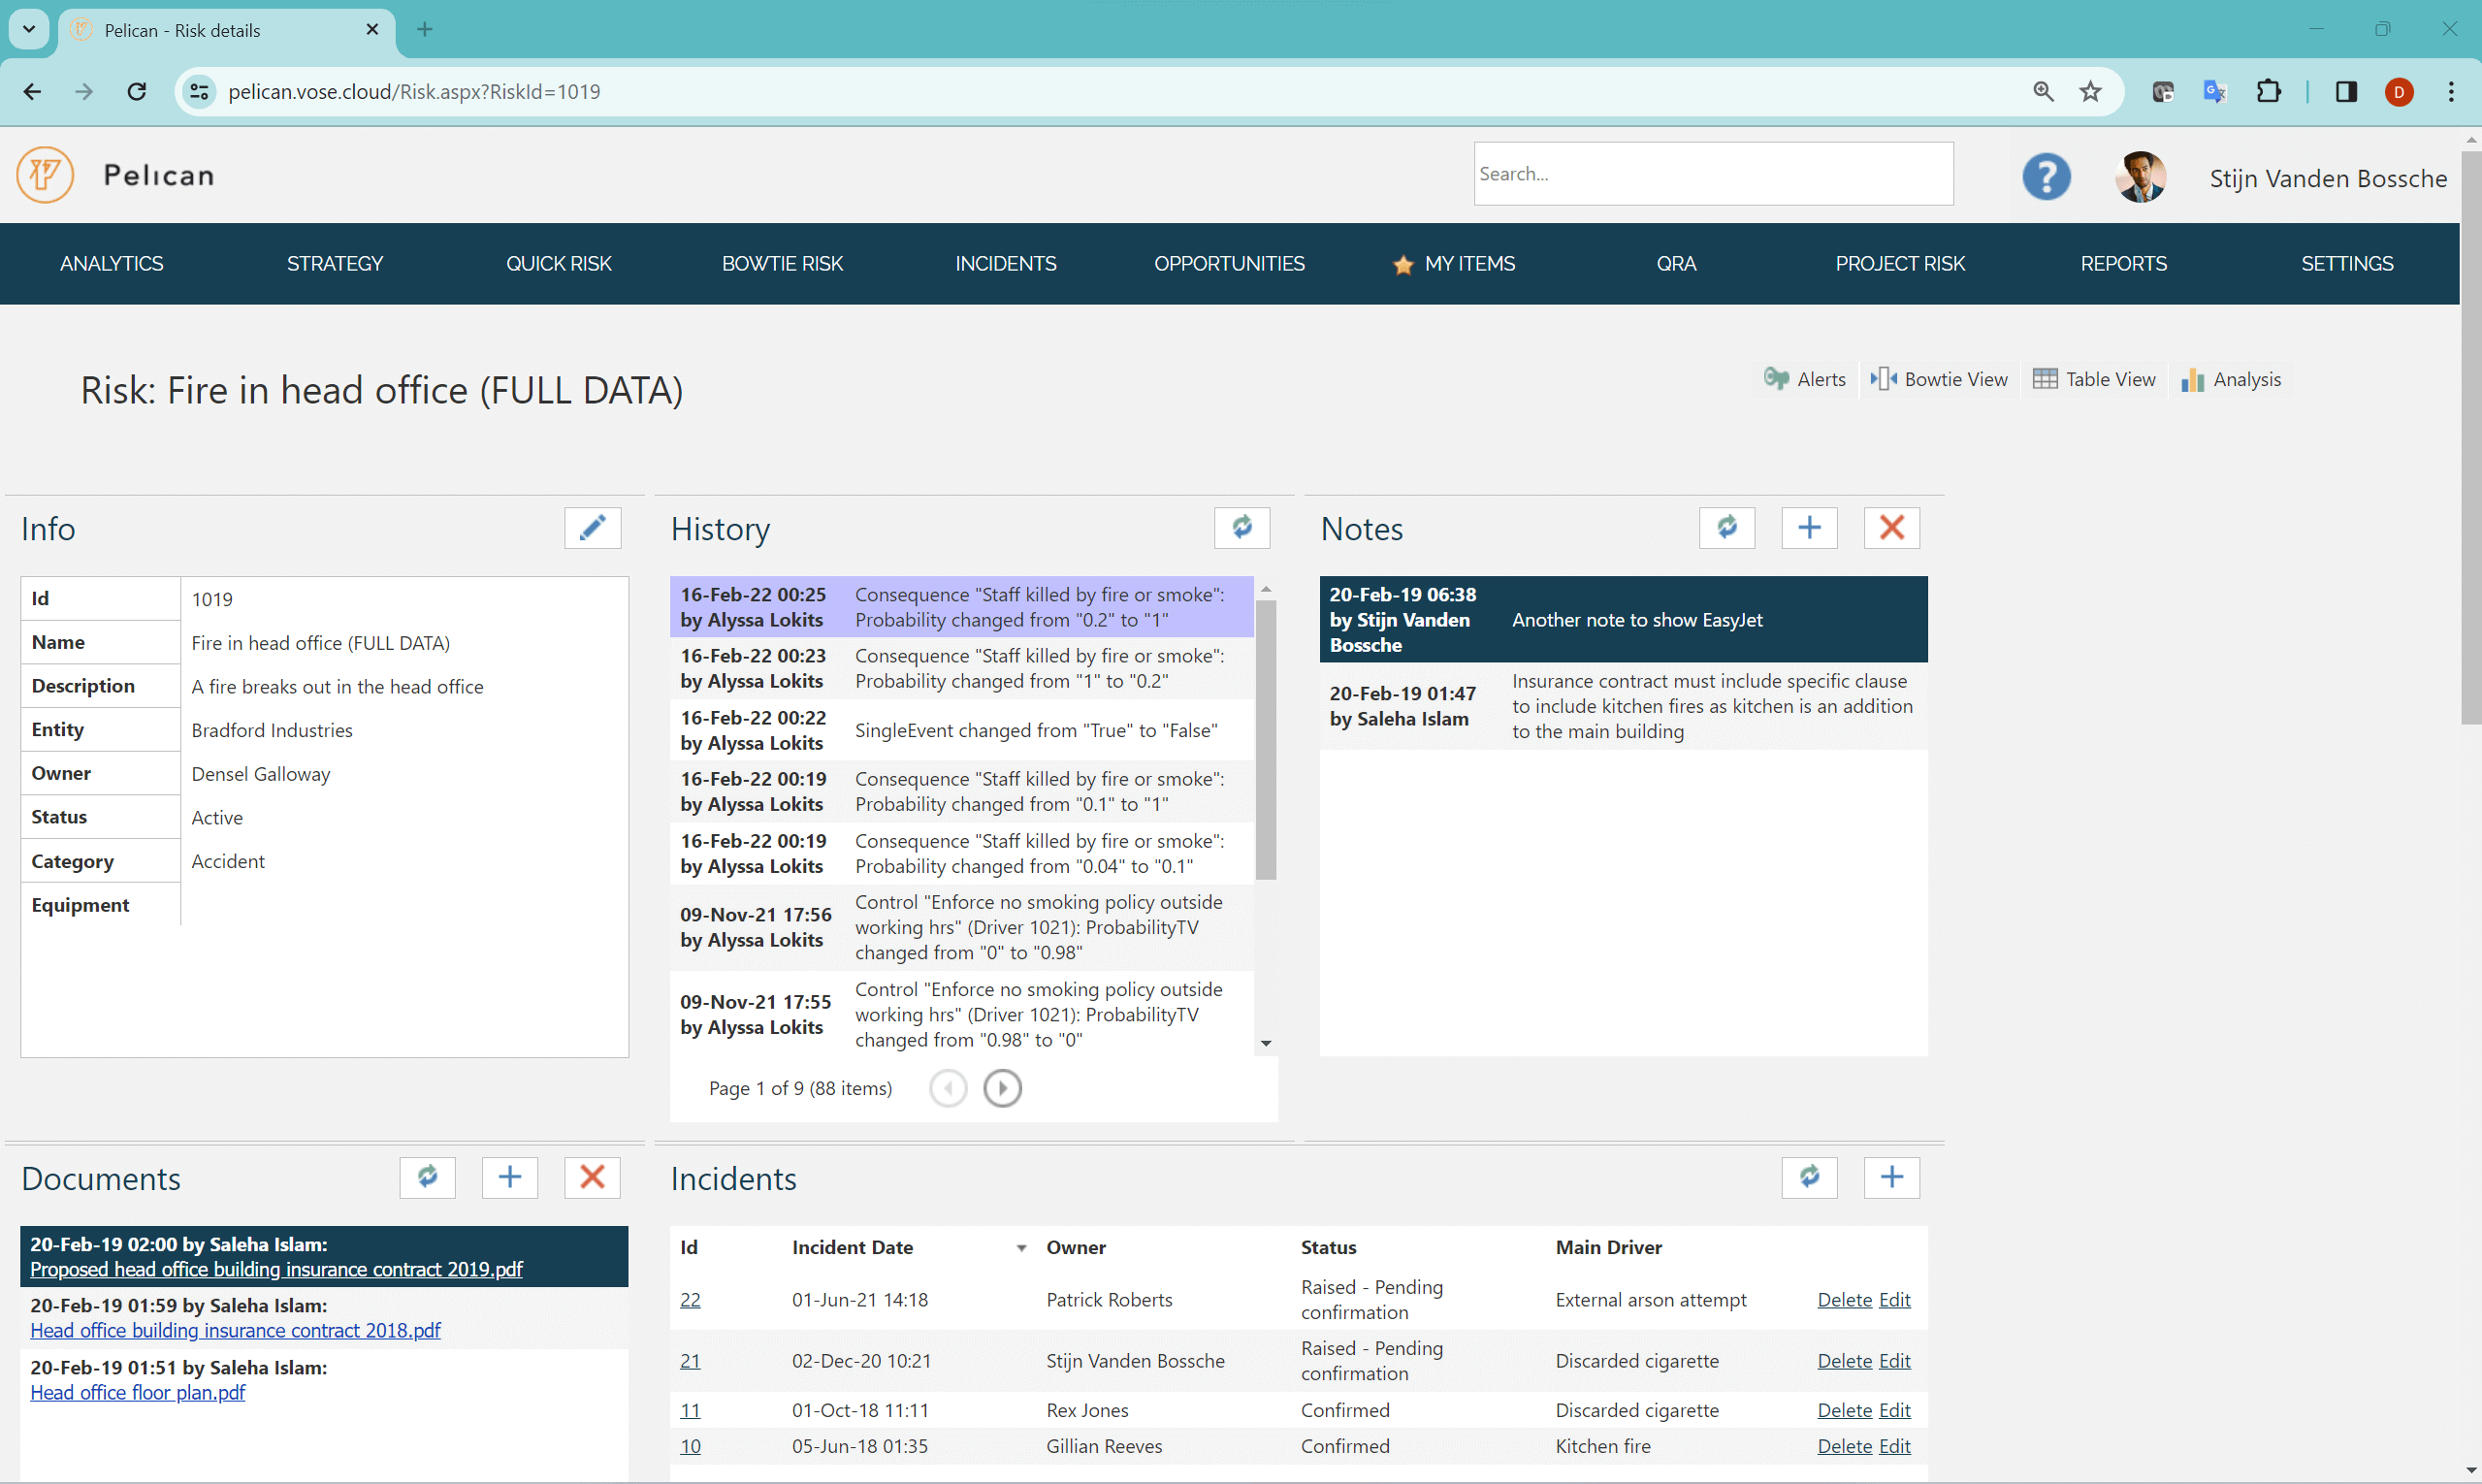 Interface showing history of changes and incidents for the specific risk